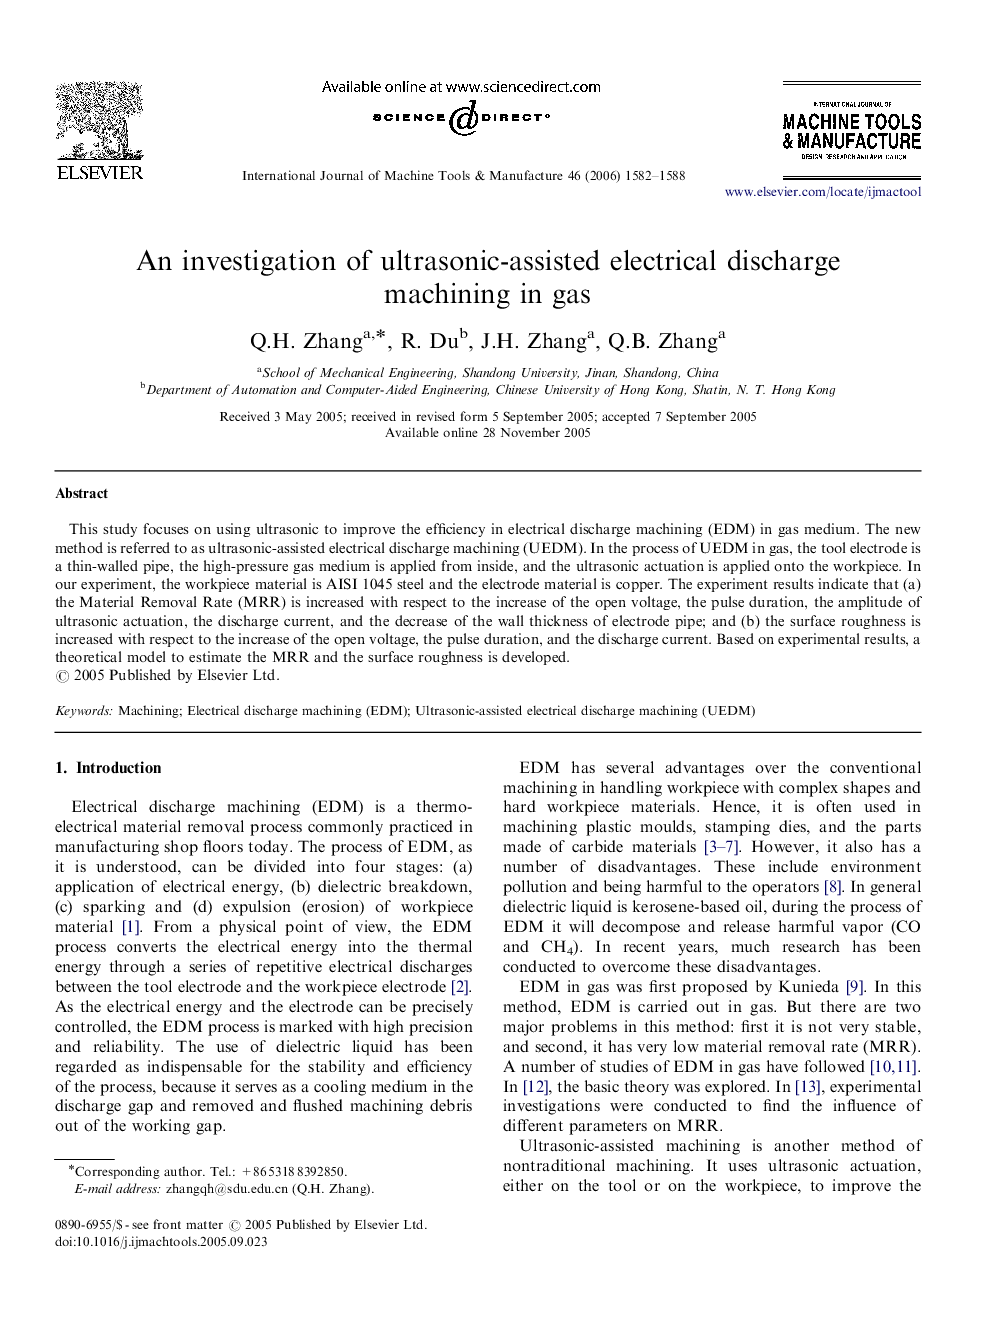 An investigation of ultrasonic-assisted electrical discharge machining in gas